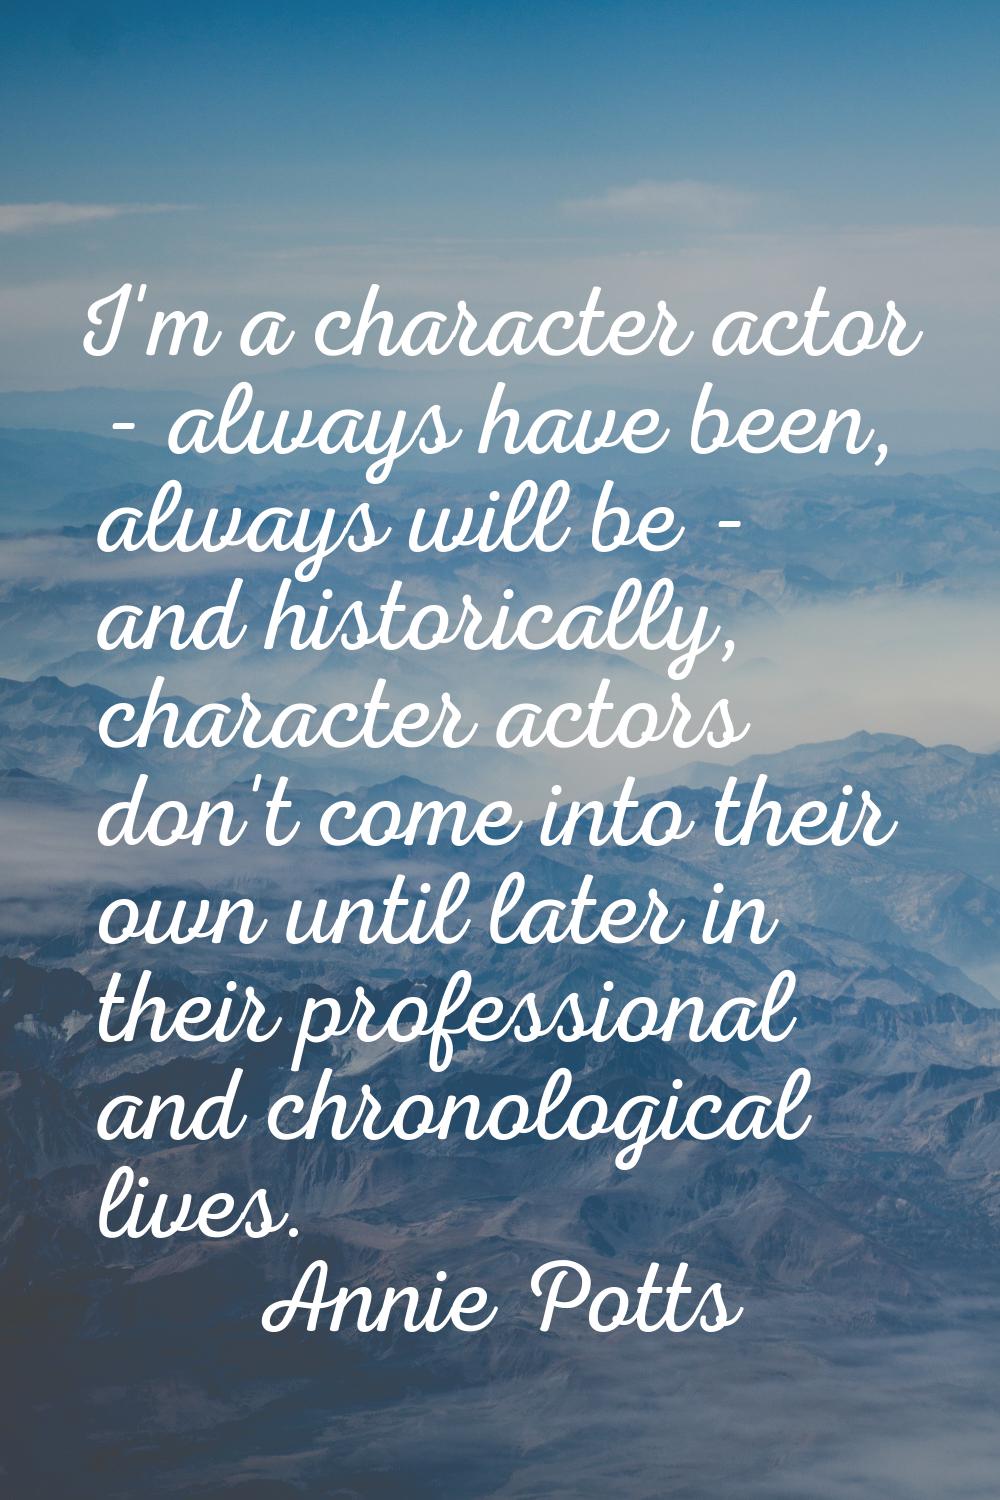 I'm a character actor - always have been, always will be - and historically, character actors don't